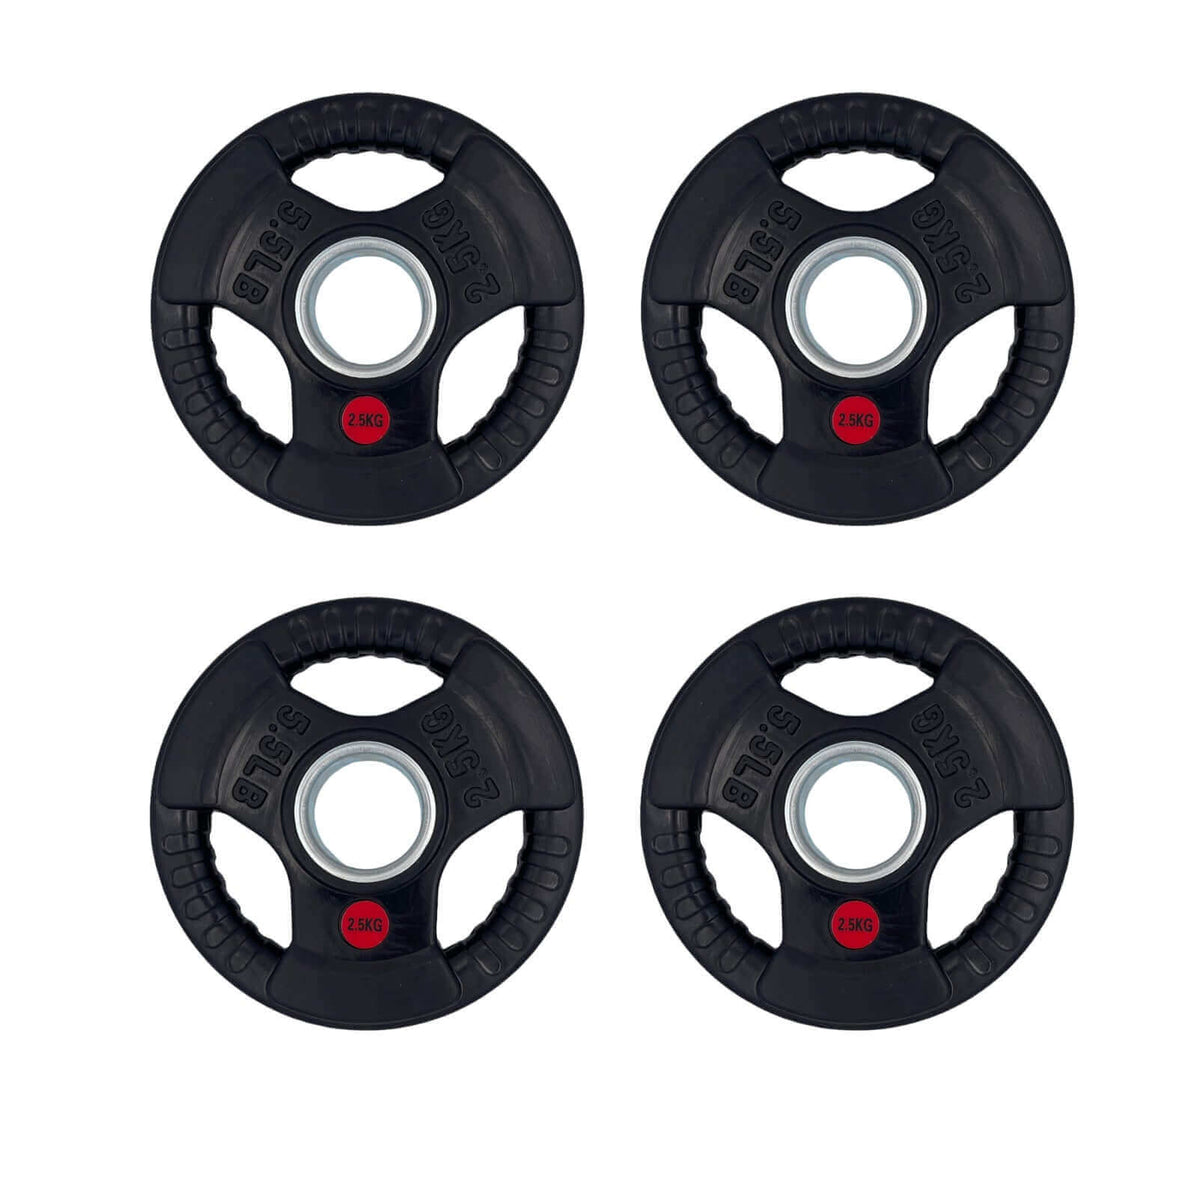 4 x 2.5kg Rubber Tri-grip Weight Plates Type-O | INSOURCE